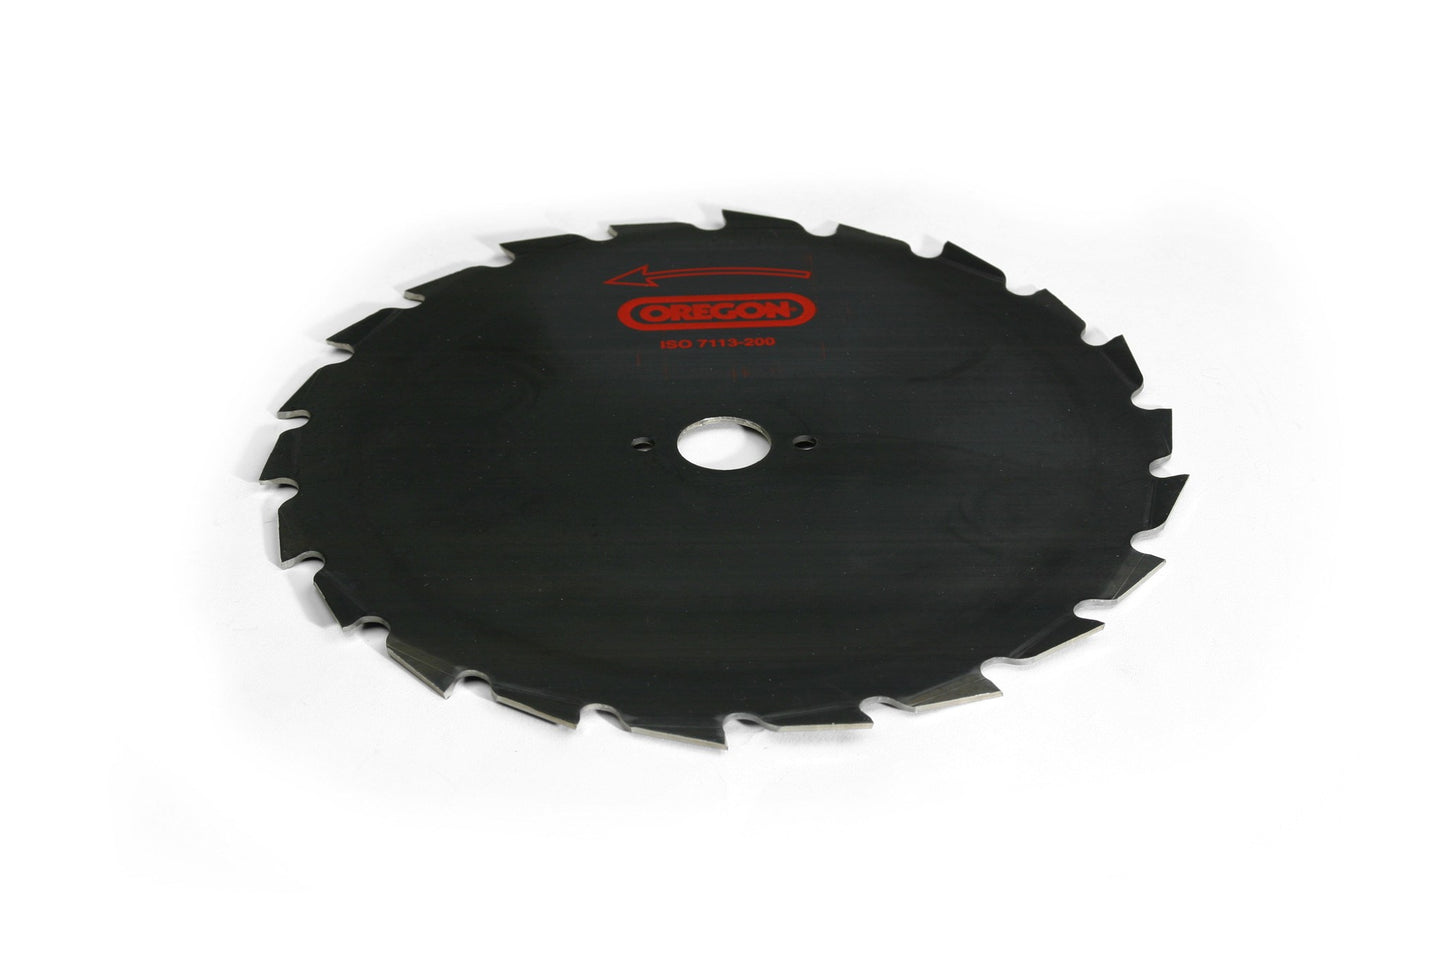 Oregon 110974 - Clearing Saw Blade MAXI - 24t x 9" - Special Order